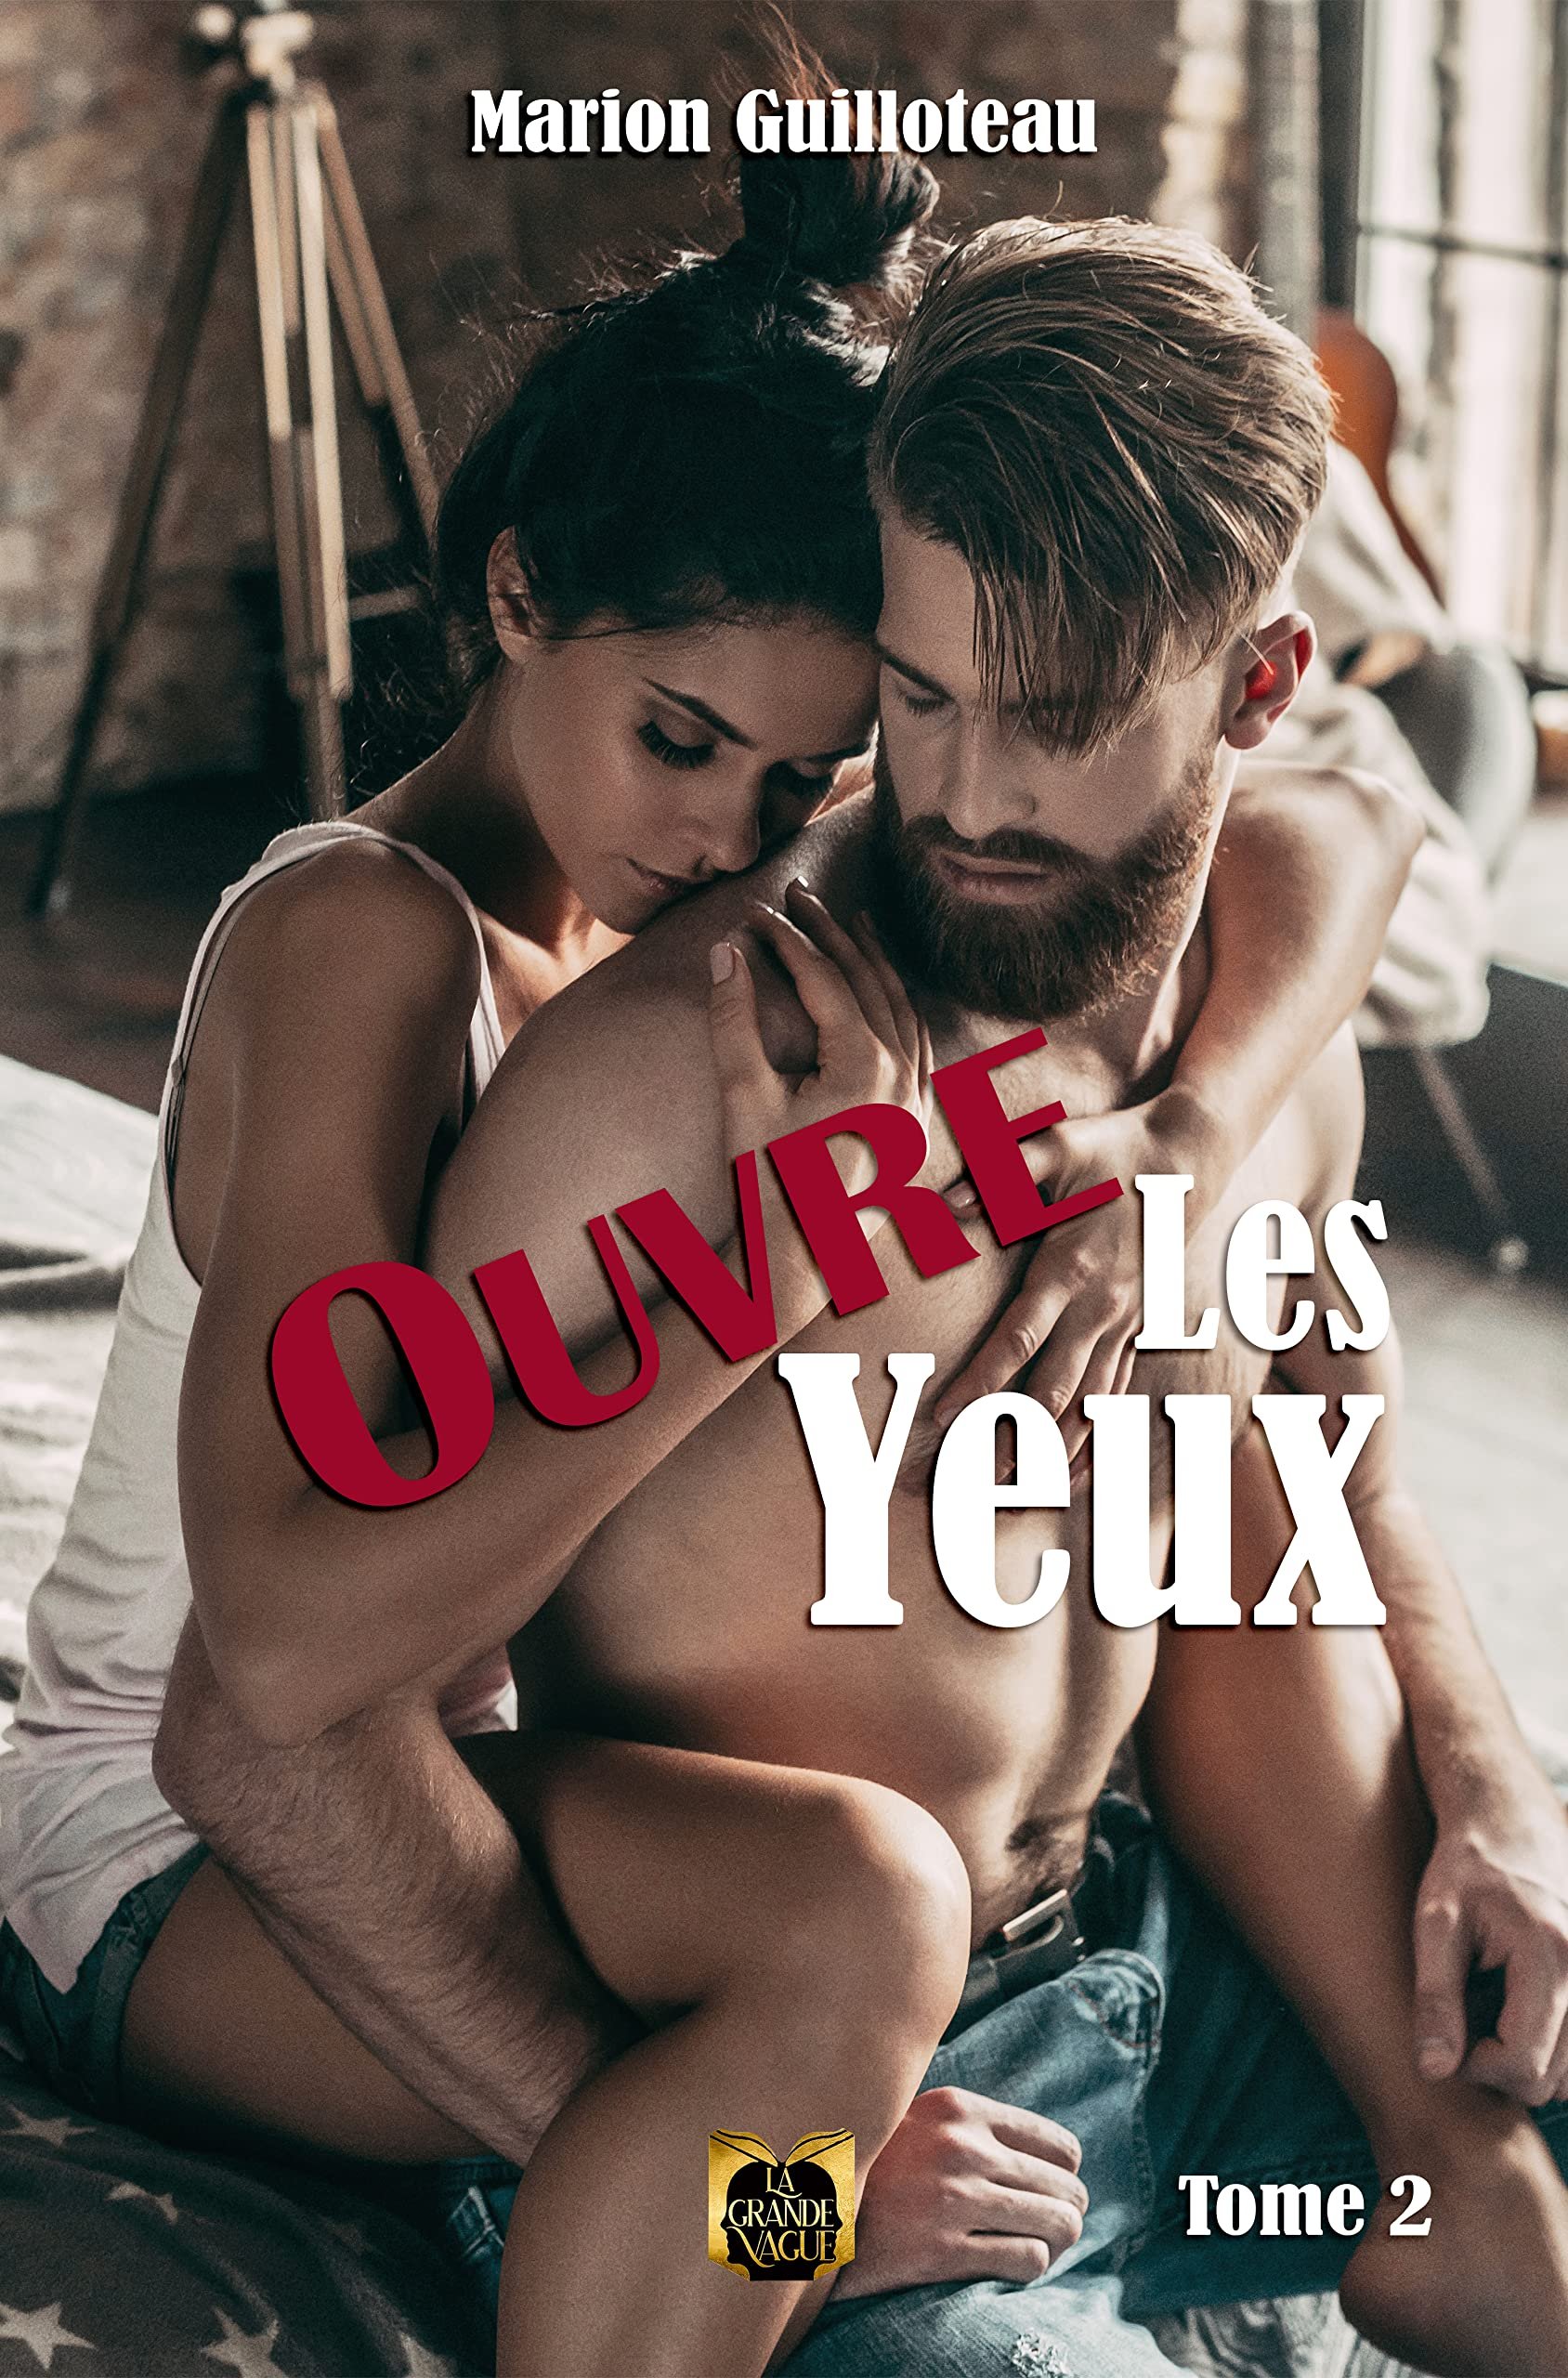 Marion Guilloteau – Ouvre les yeux, Tome 2